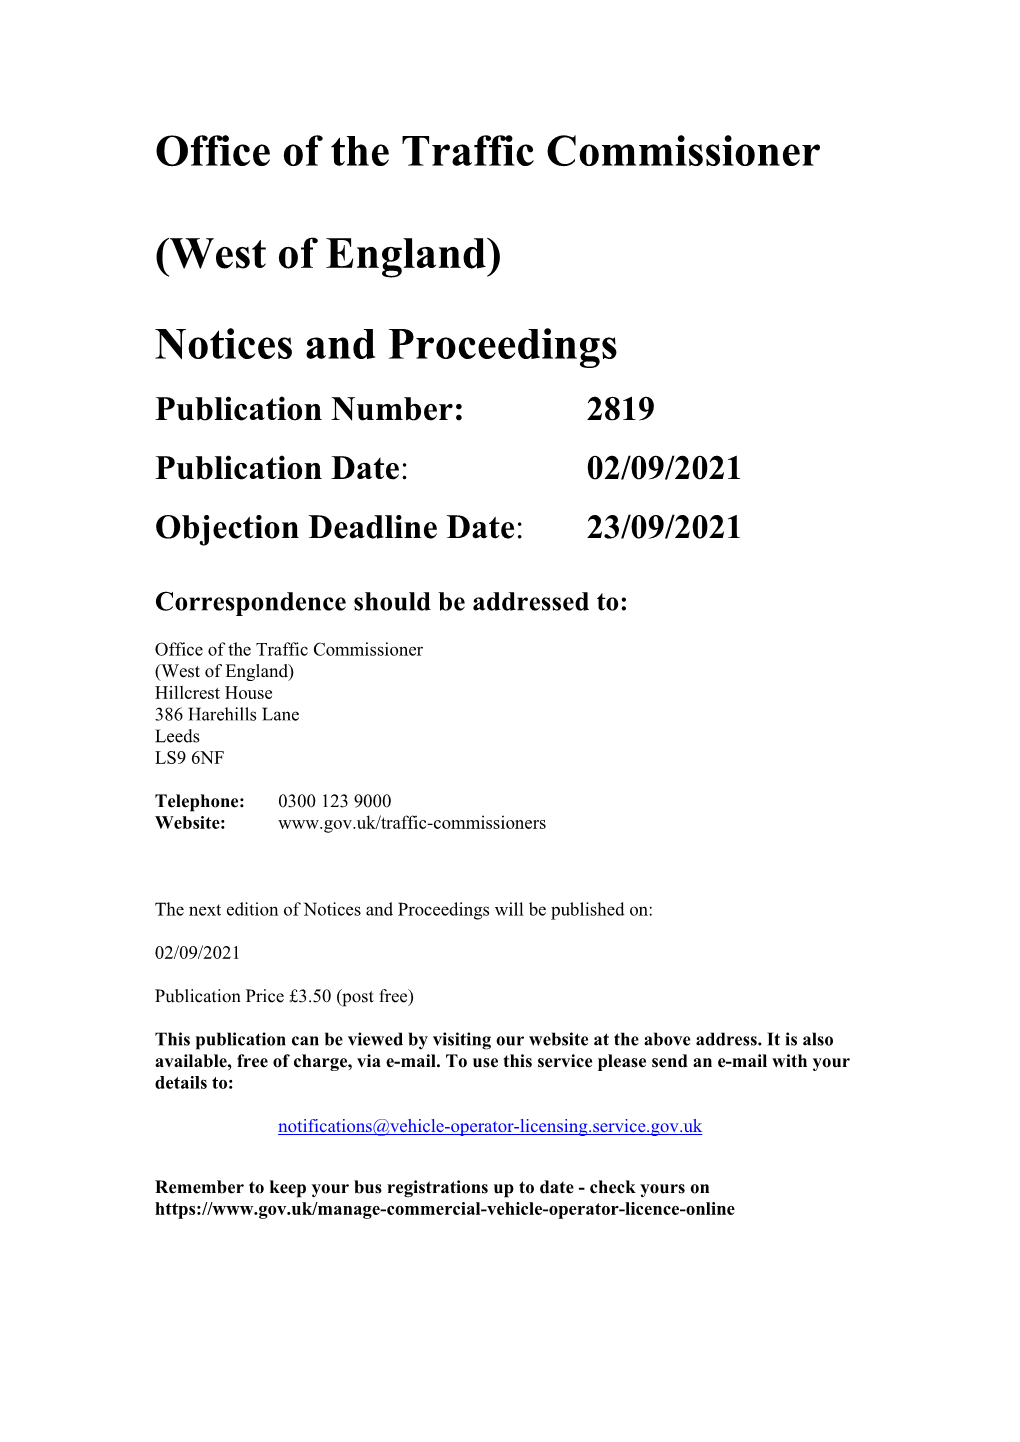 (West of England) Notices and Proceedings